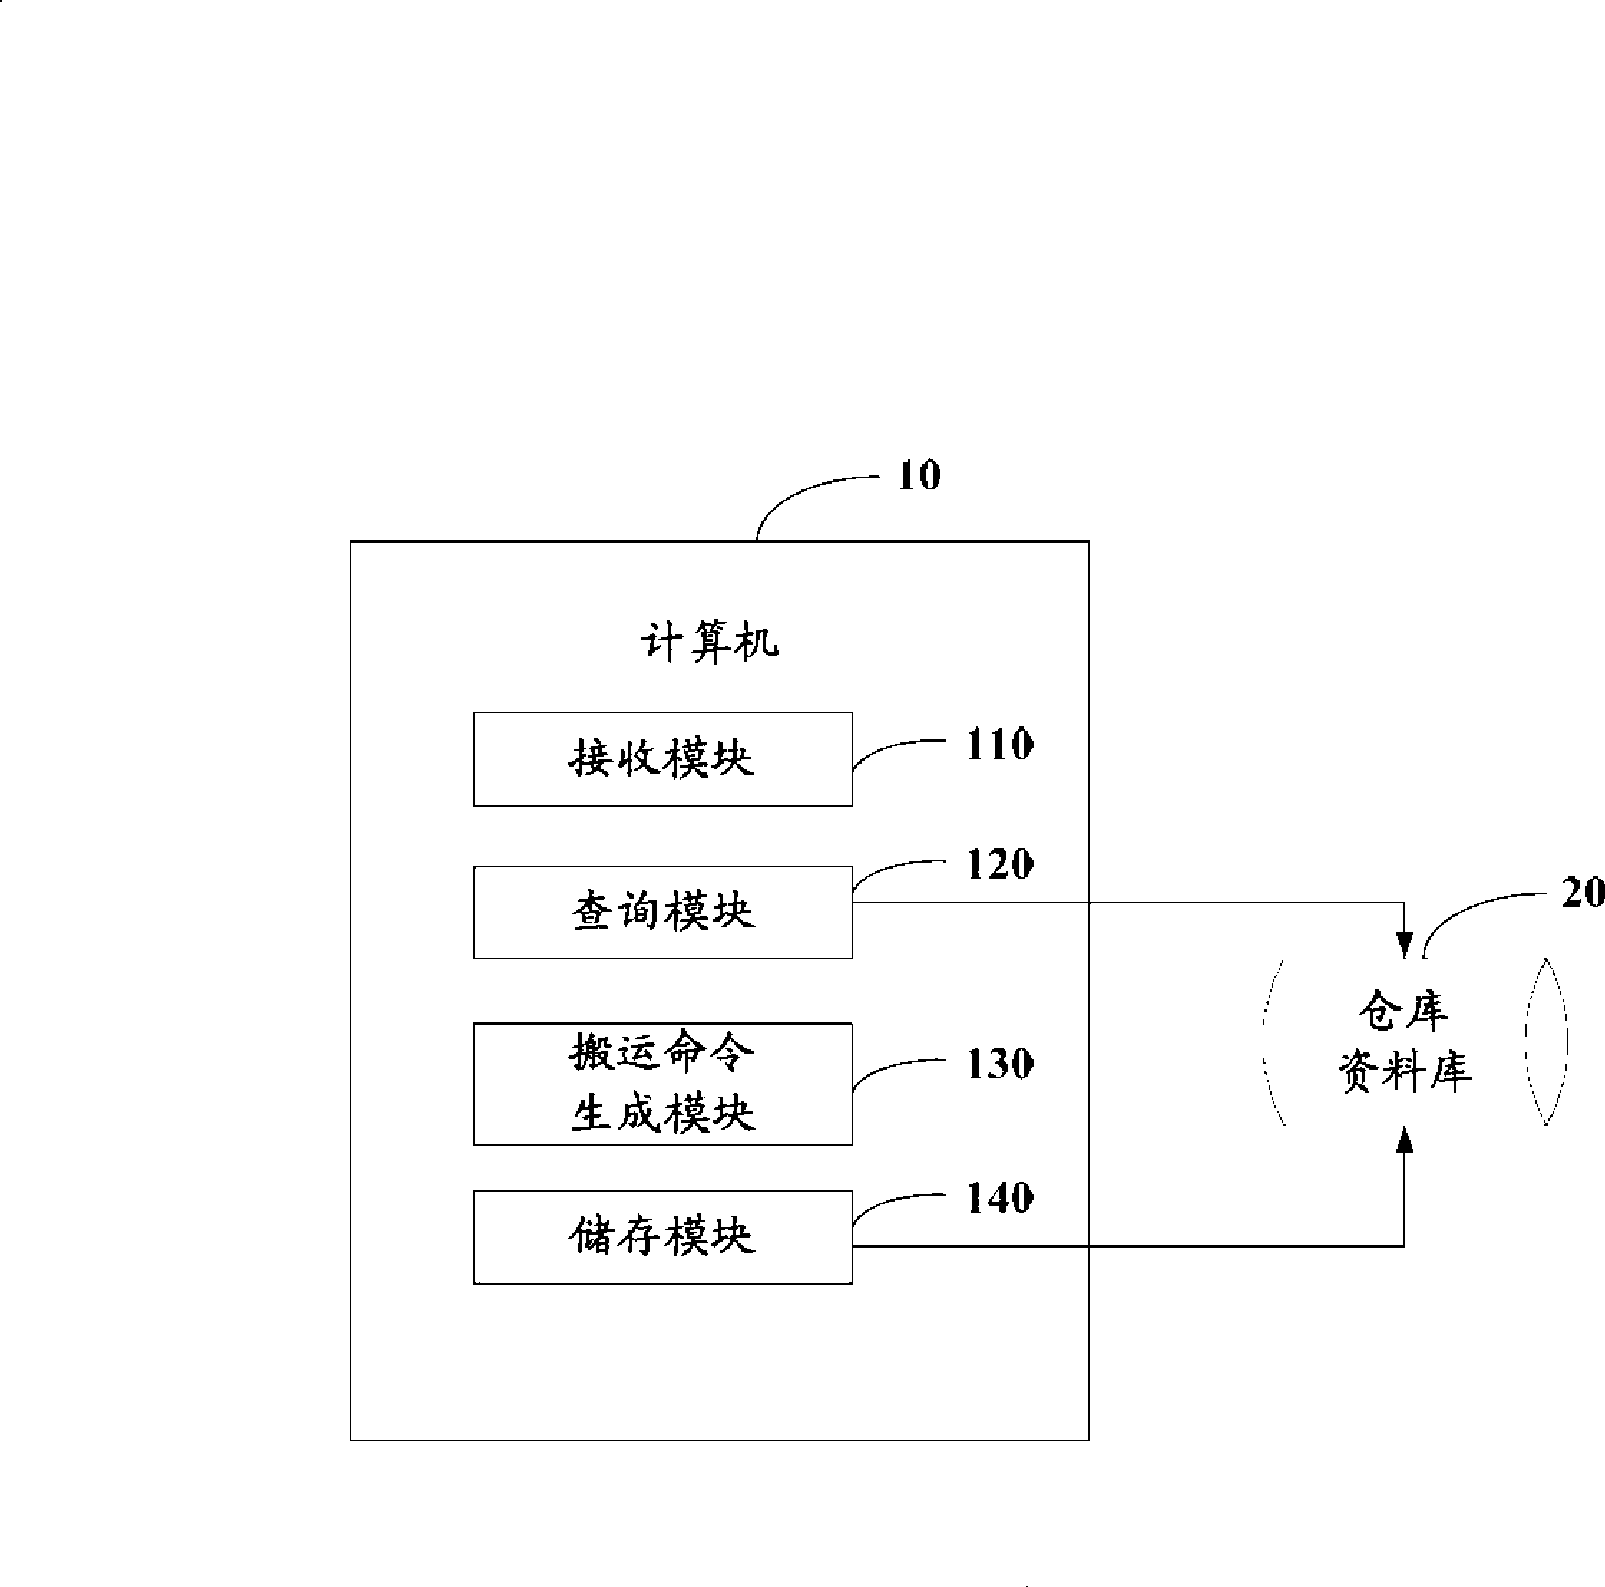 Carrying command automatic generation system and method